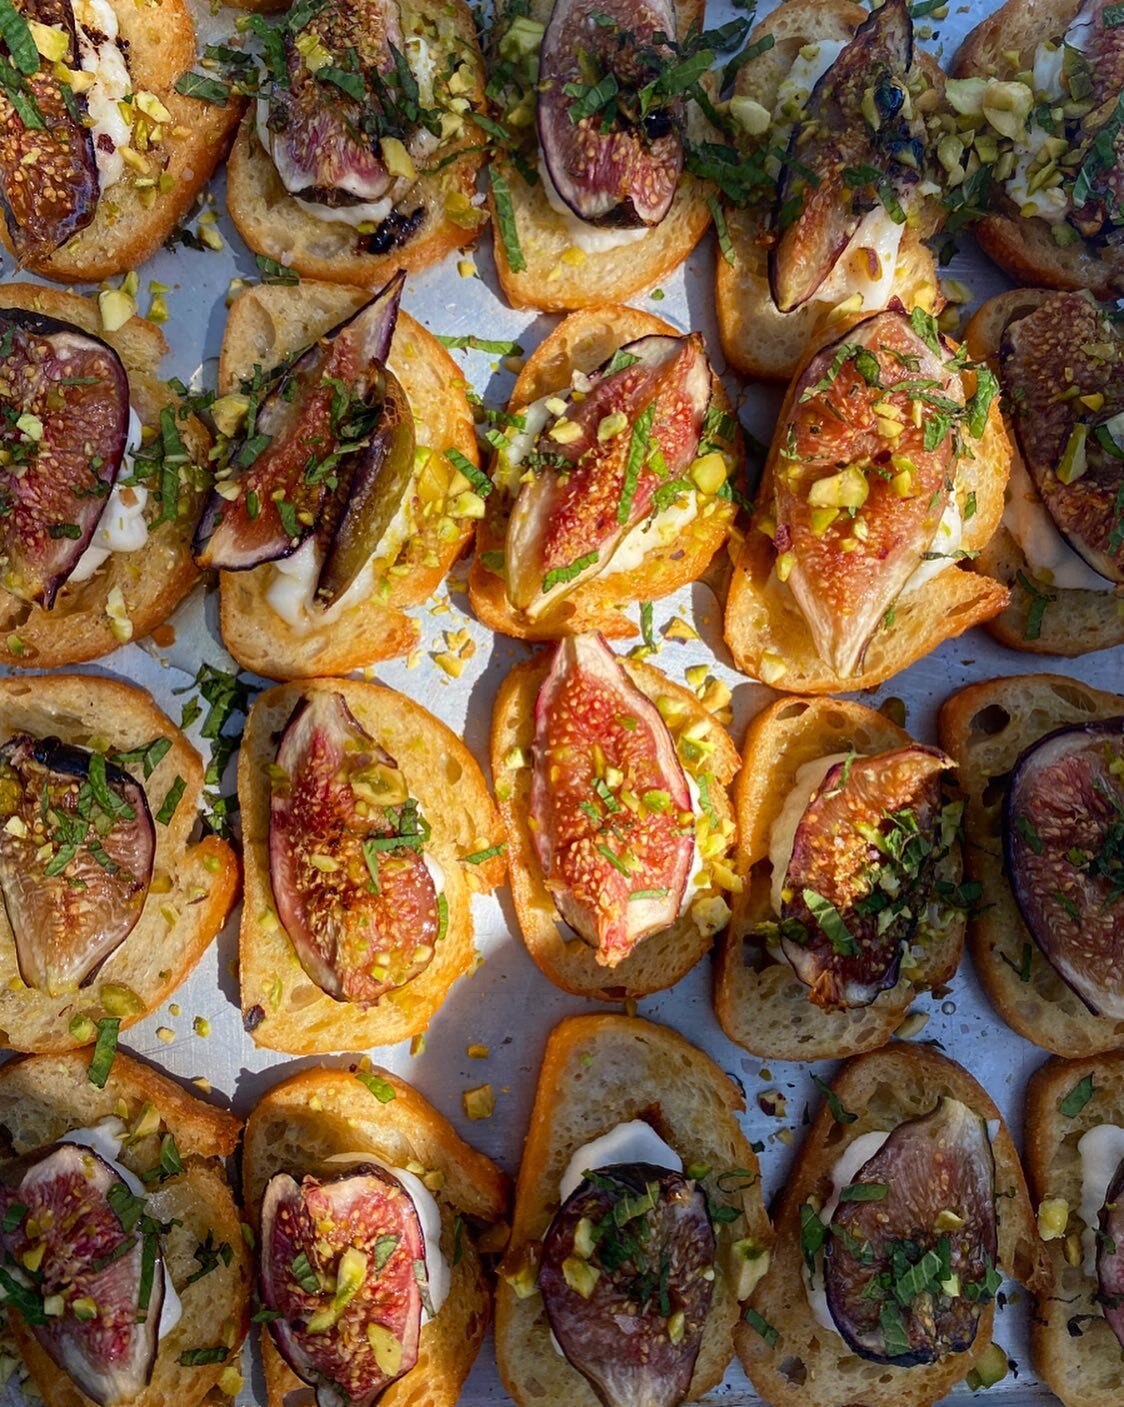 Yummy summertime apps at last weekend&rsquo;s wedding. Roasted figs with @bellwetherfarms sheep ricotta, honey and pistachios @holmanranch with @coastsidecouture #roastedfigs #sheepricotta